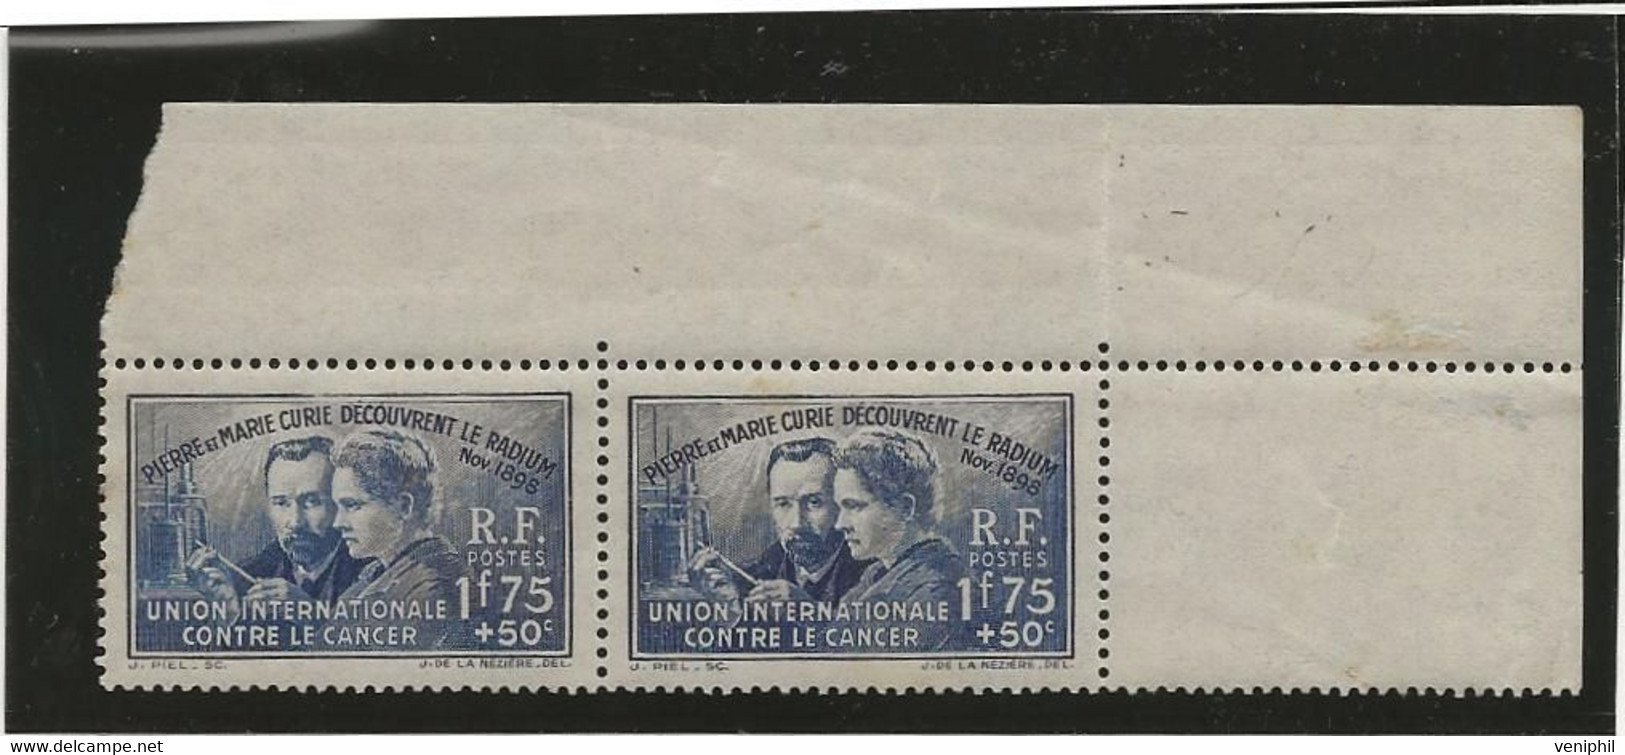 N° 402 PAIRE BORD DE FEUILLE NEUF SANS CHARNIERE (1 Timbre Avec Infime Adherence Classeur°) ANEE 1938 -COTE : 54 € - Unused Stamps